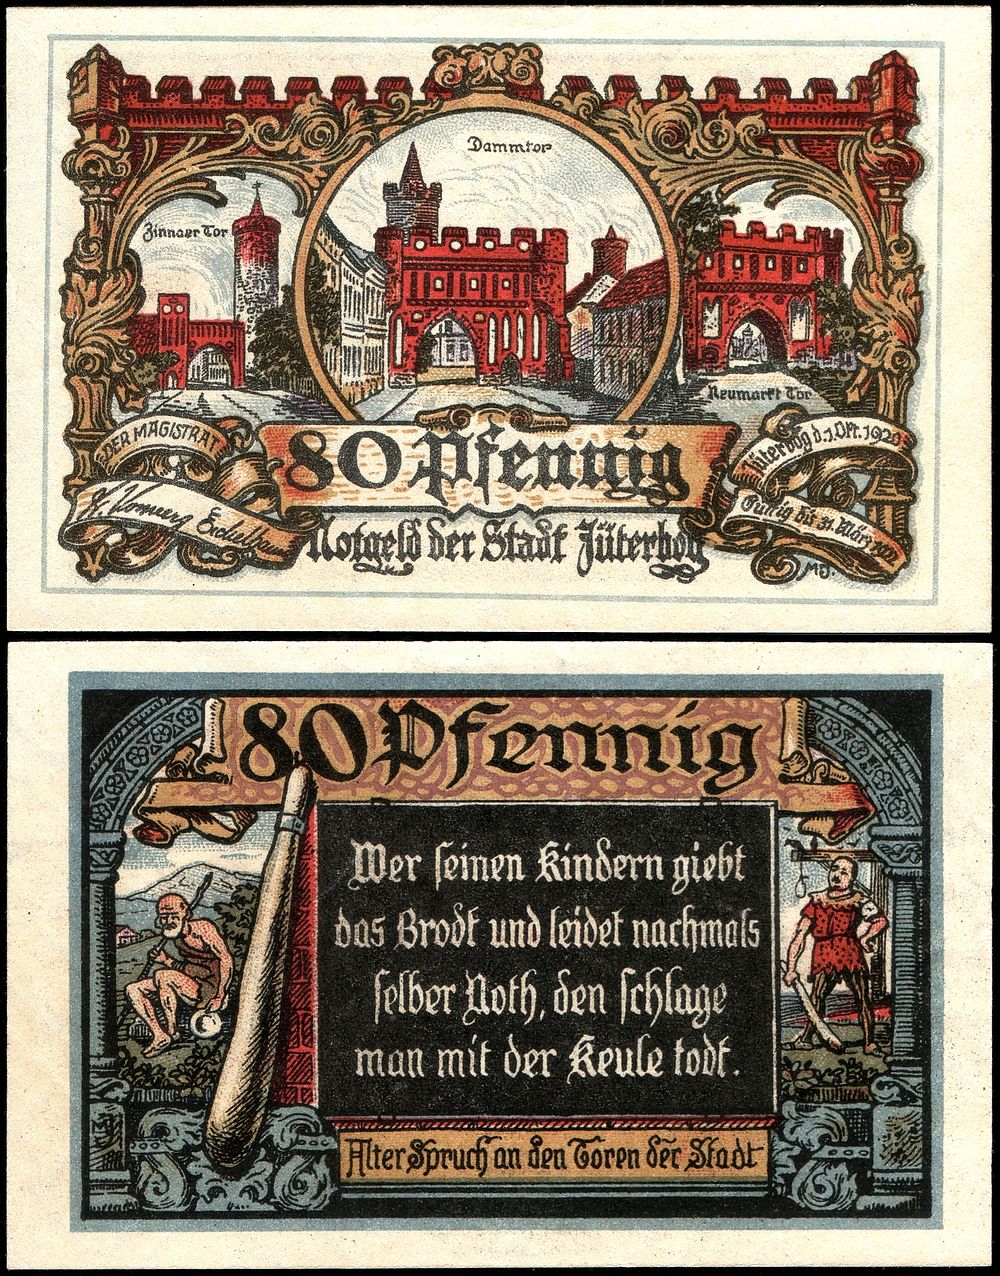 80 Pfennig Notgeld banknote issued by the Town of Jüterbog, dated Oct. 1, 1920, size: 63 mm x 100 mm.